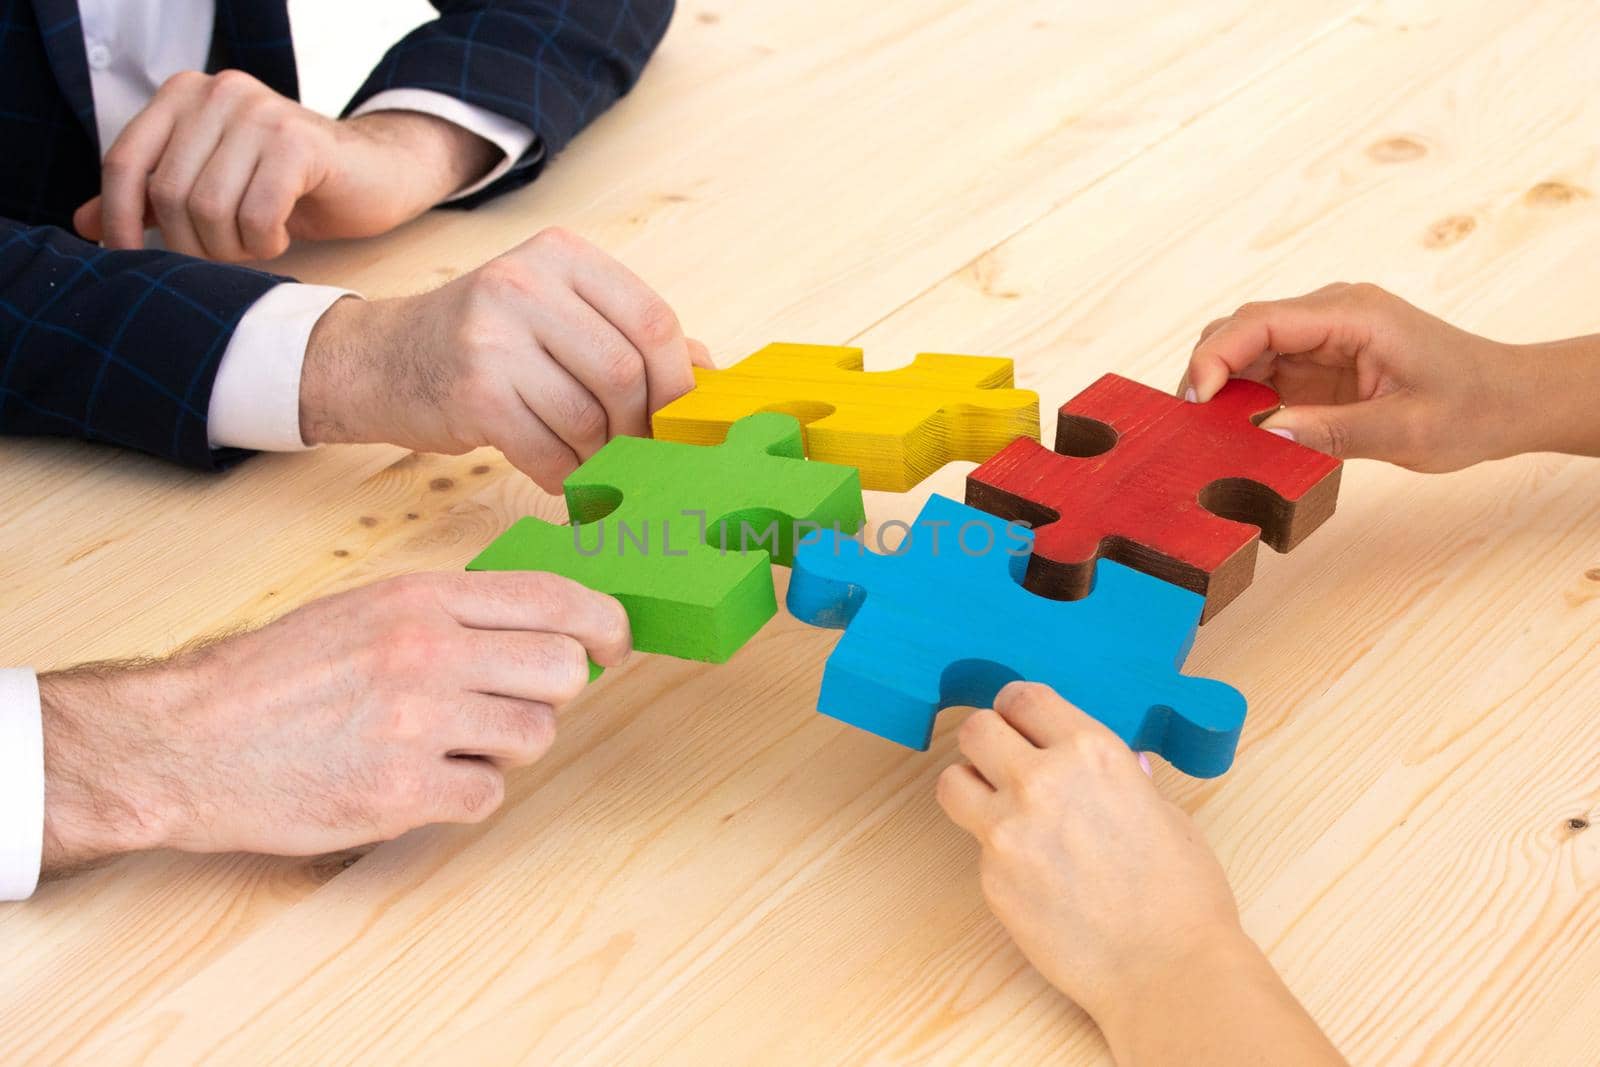 Business people team assembling four color jigsaw puzzle pieces unity cooperation ideas concept